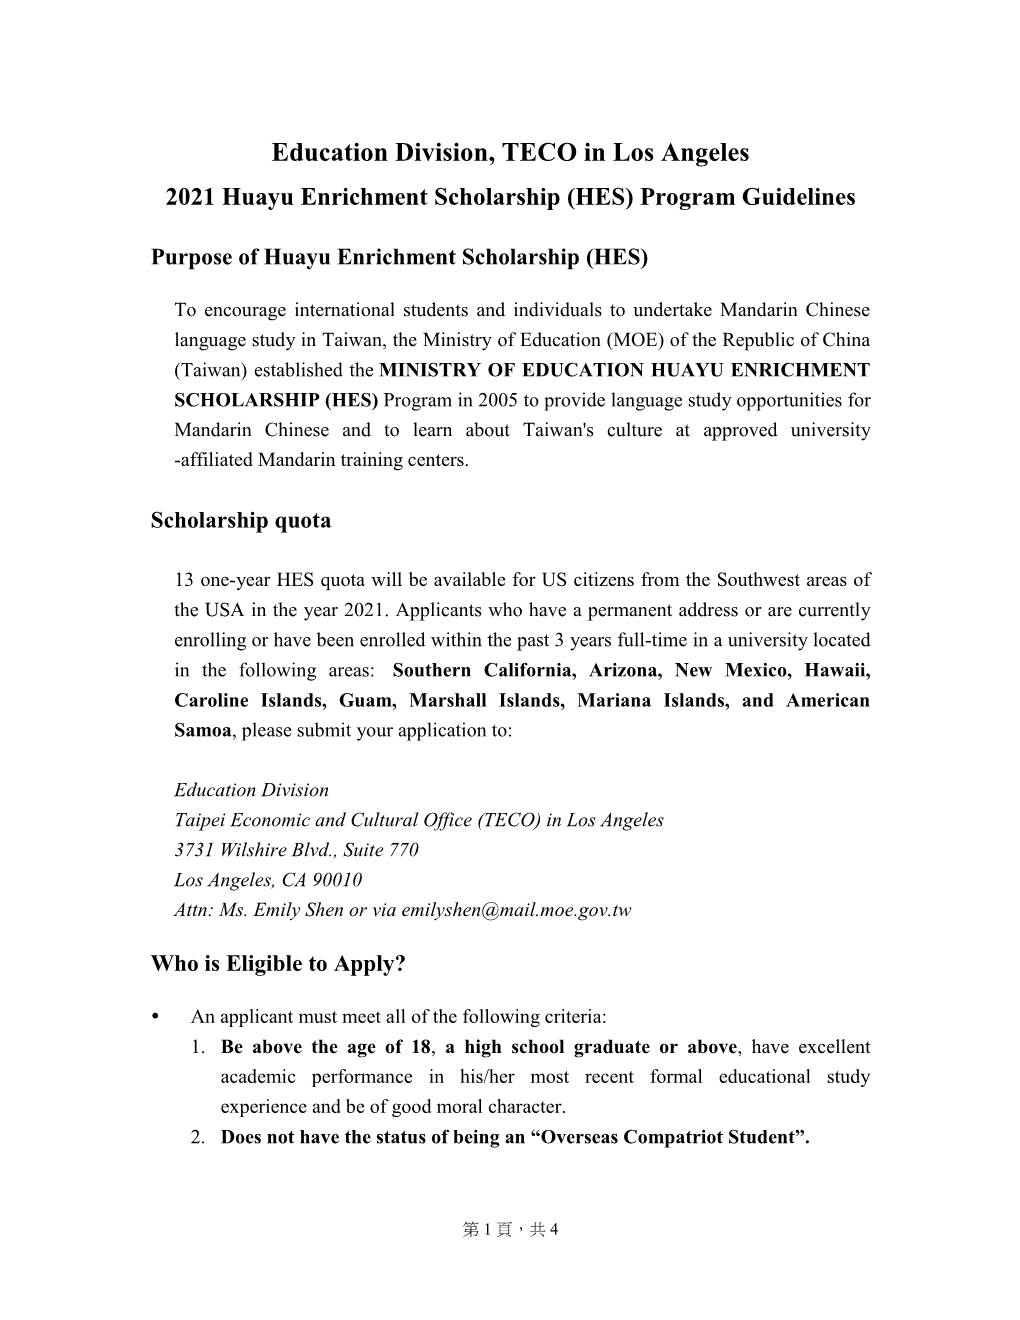 Education Division, TECO in Los Angeles 2021 Huayu Enrichment Scholarship (HES) Program Guidelines